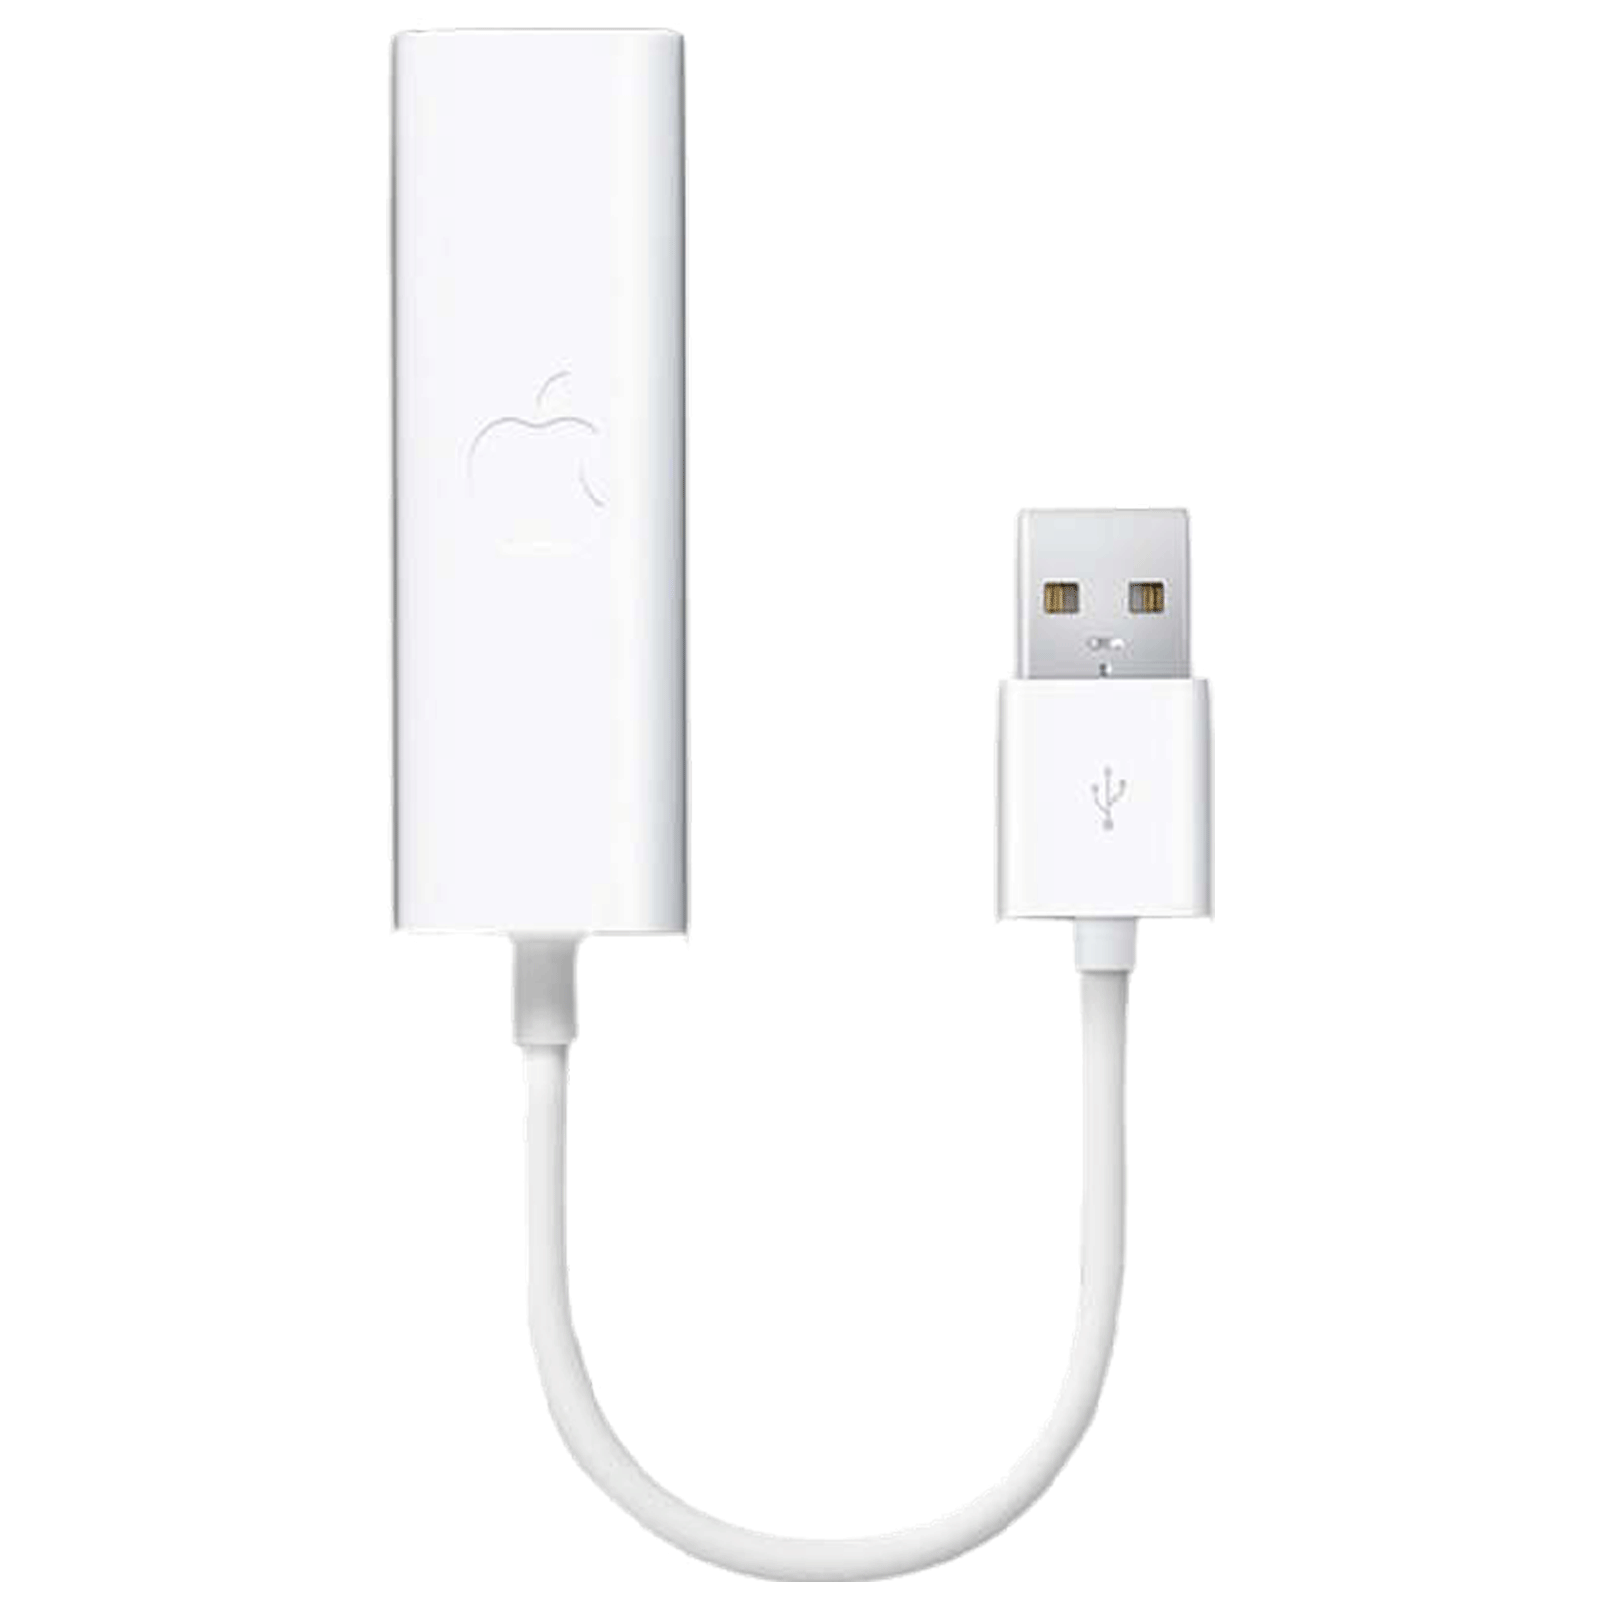 Apple 0.1 Meter USB 2.0 (Type-A) to RJ45 Adapter Cable (100 Mbps Transfer Speed, MC704ZM/A, White)_1